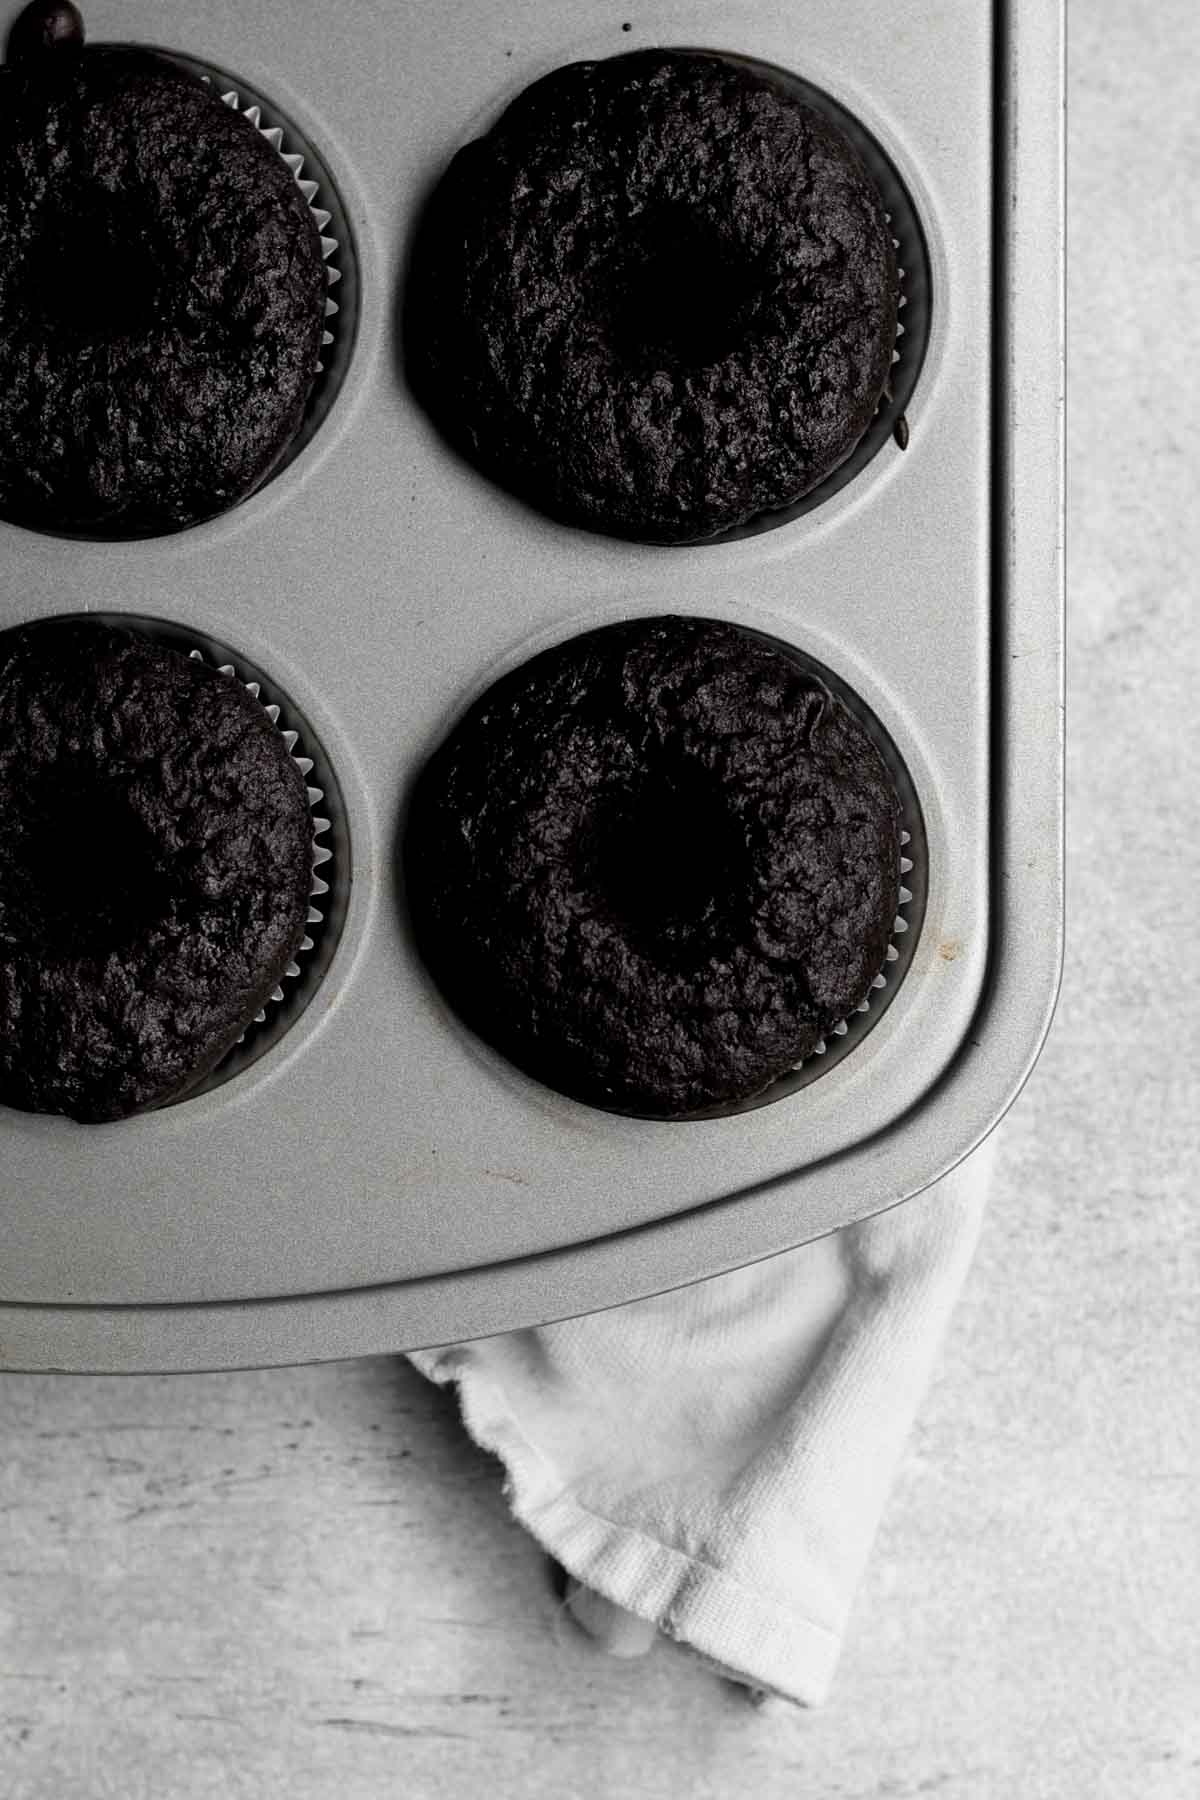 Holes dug into the center of the cupcakes.